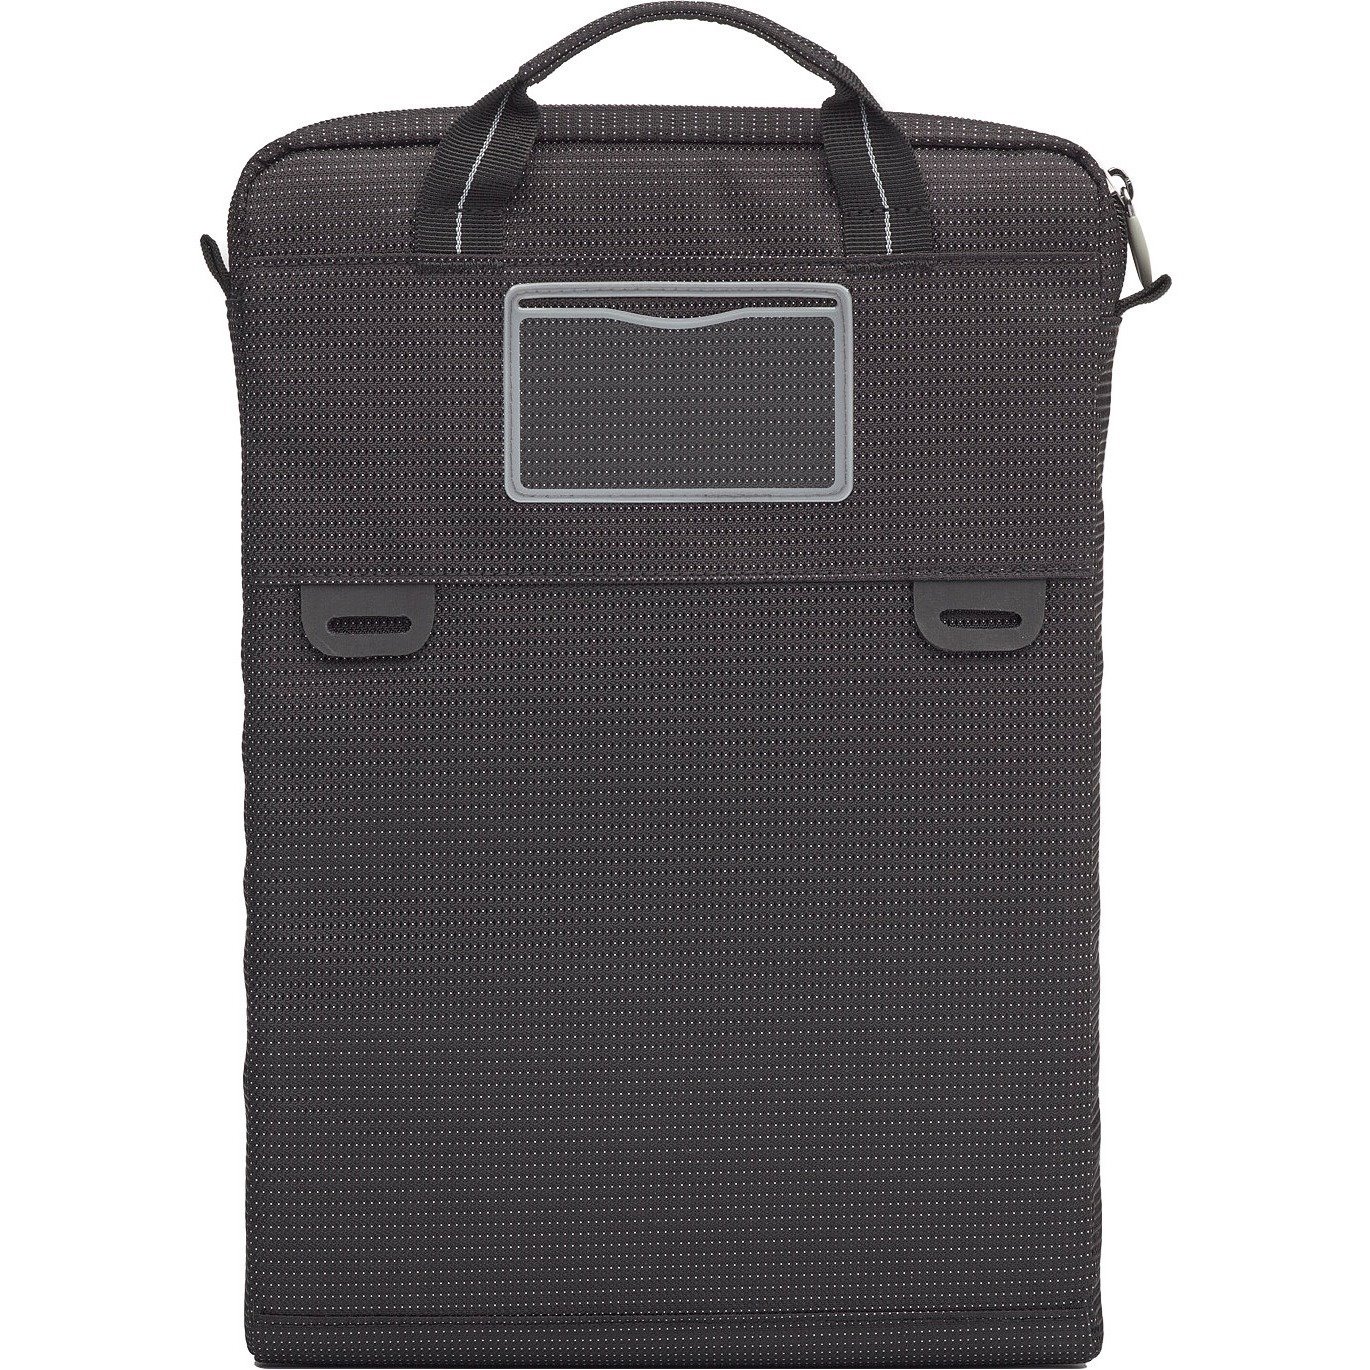 Brenthaven Tred 2689 Carrying Case (Sleeve) for 11" Notebook, Chromebook - Black